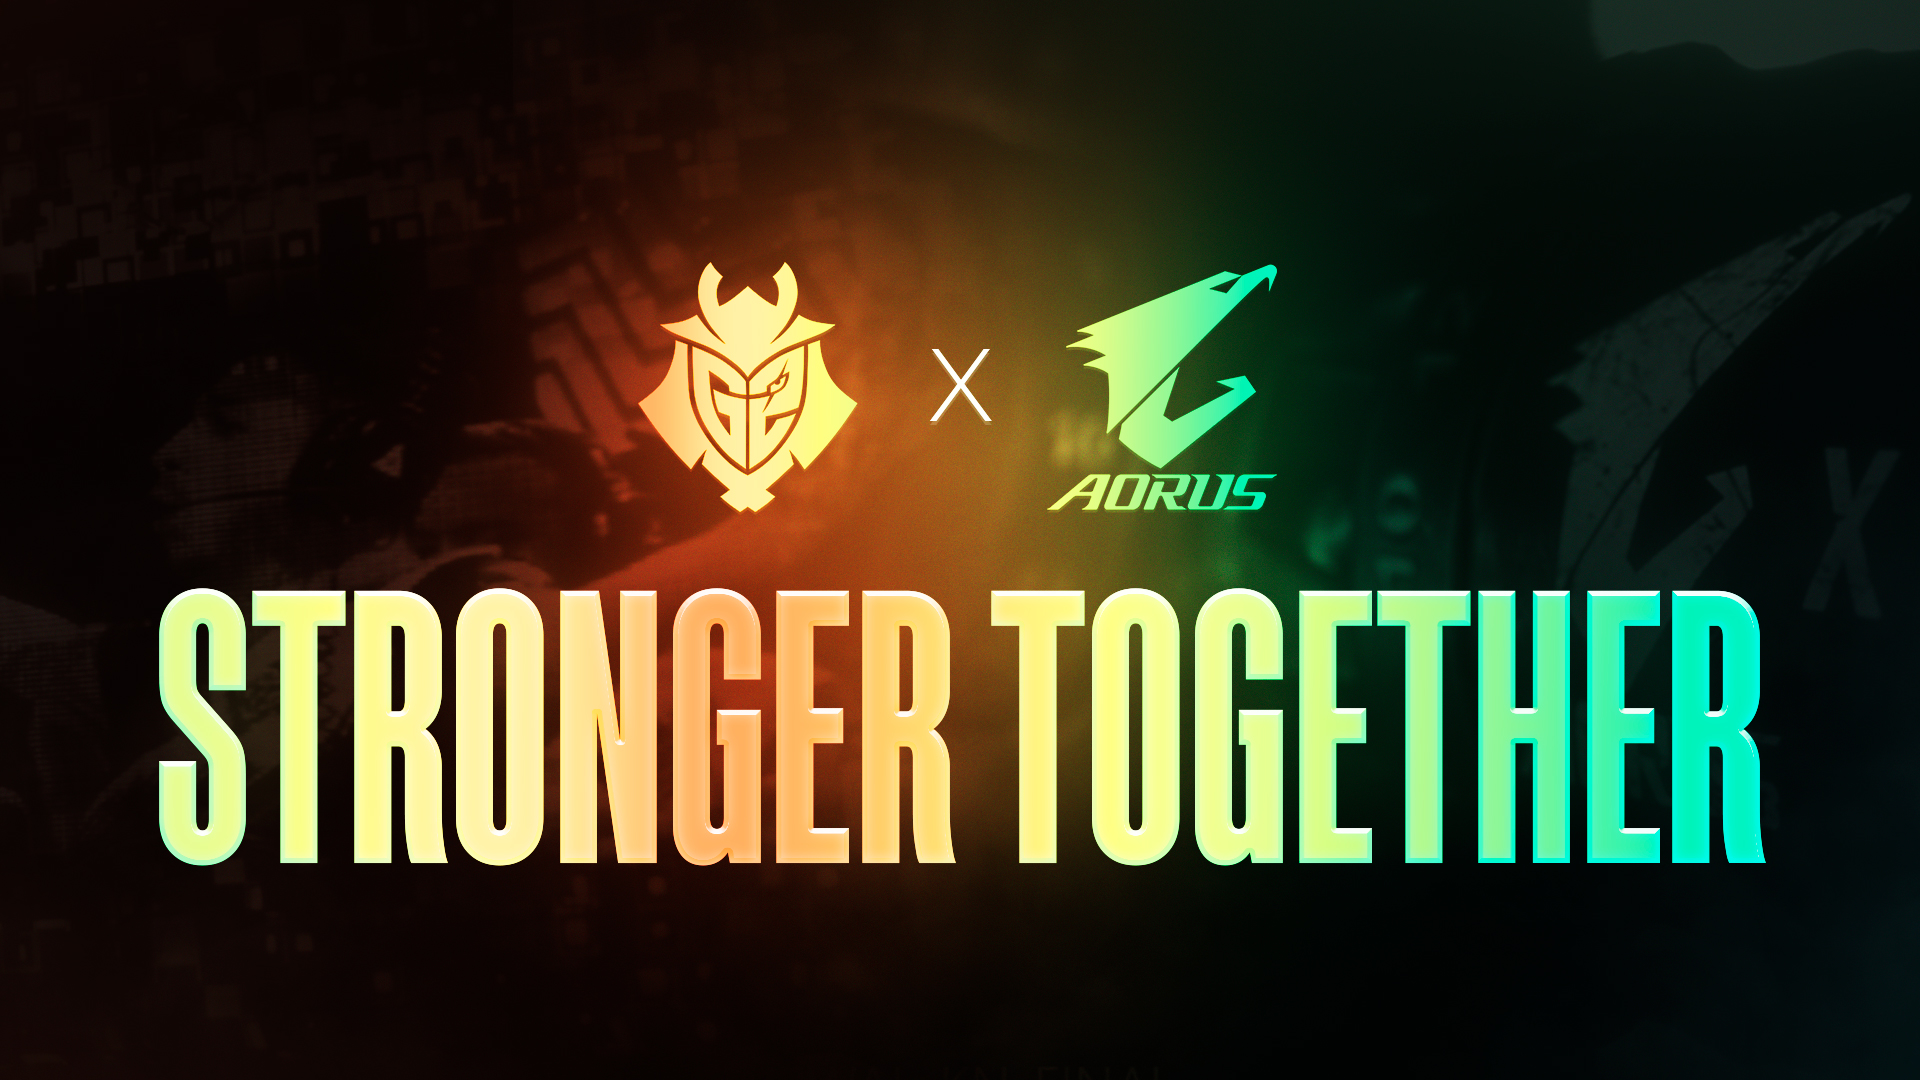 GIGABYTE AORUS and G2 Esports Renew Partnership for a 4th Term